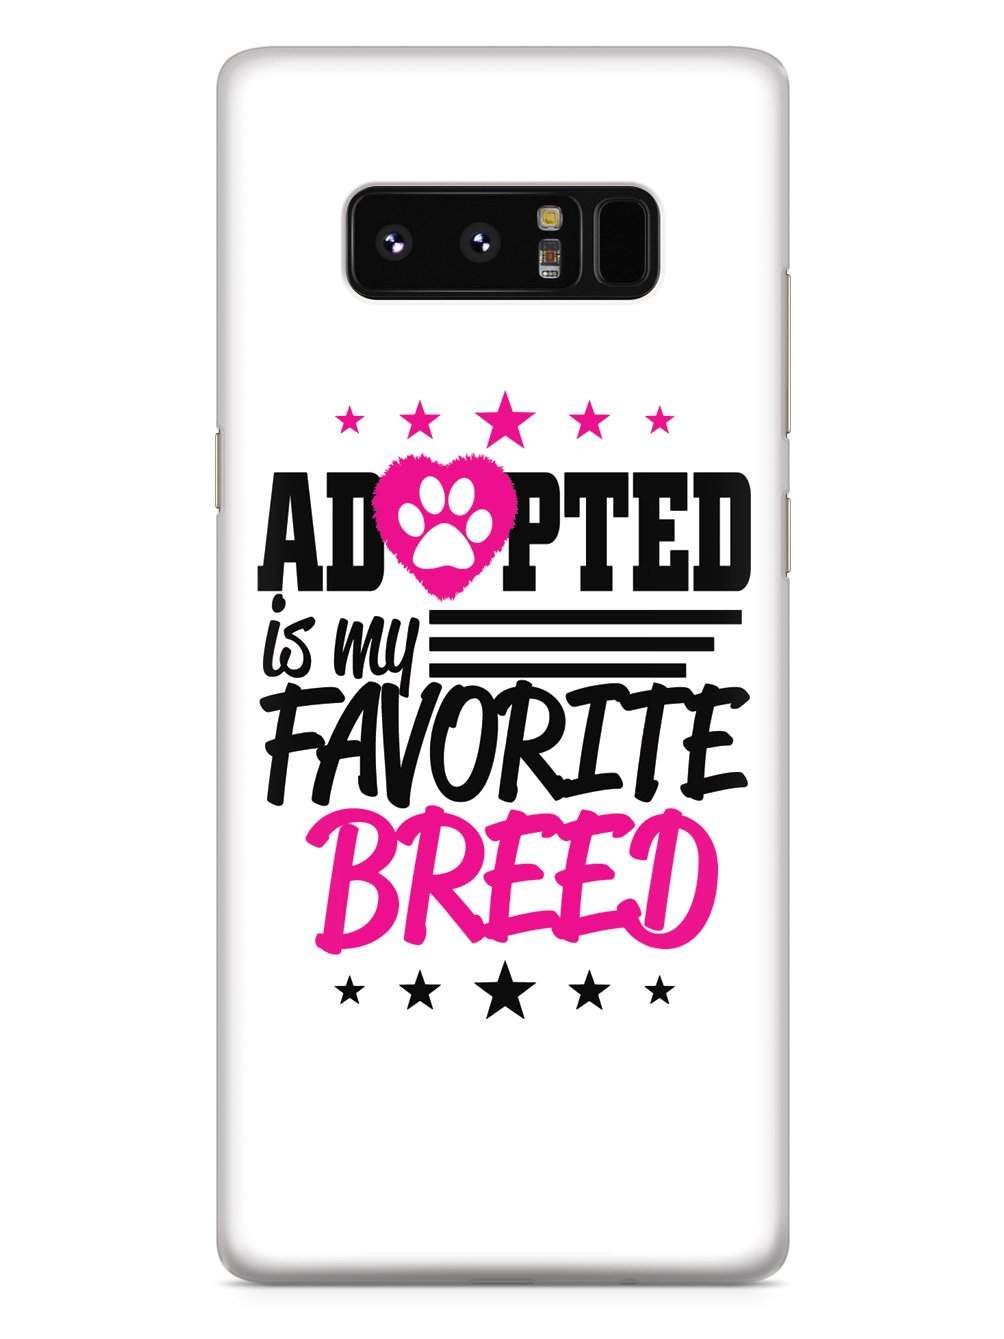 My Favorite Breed is Adopted - White Case